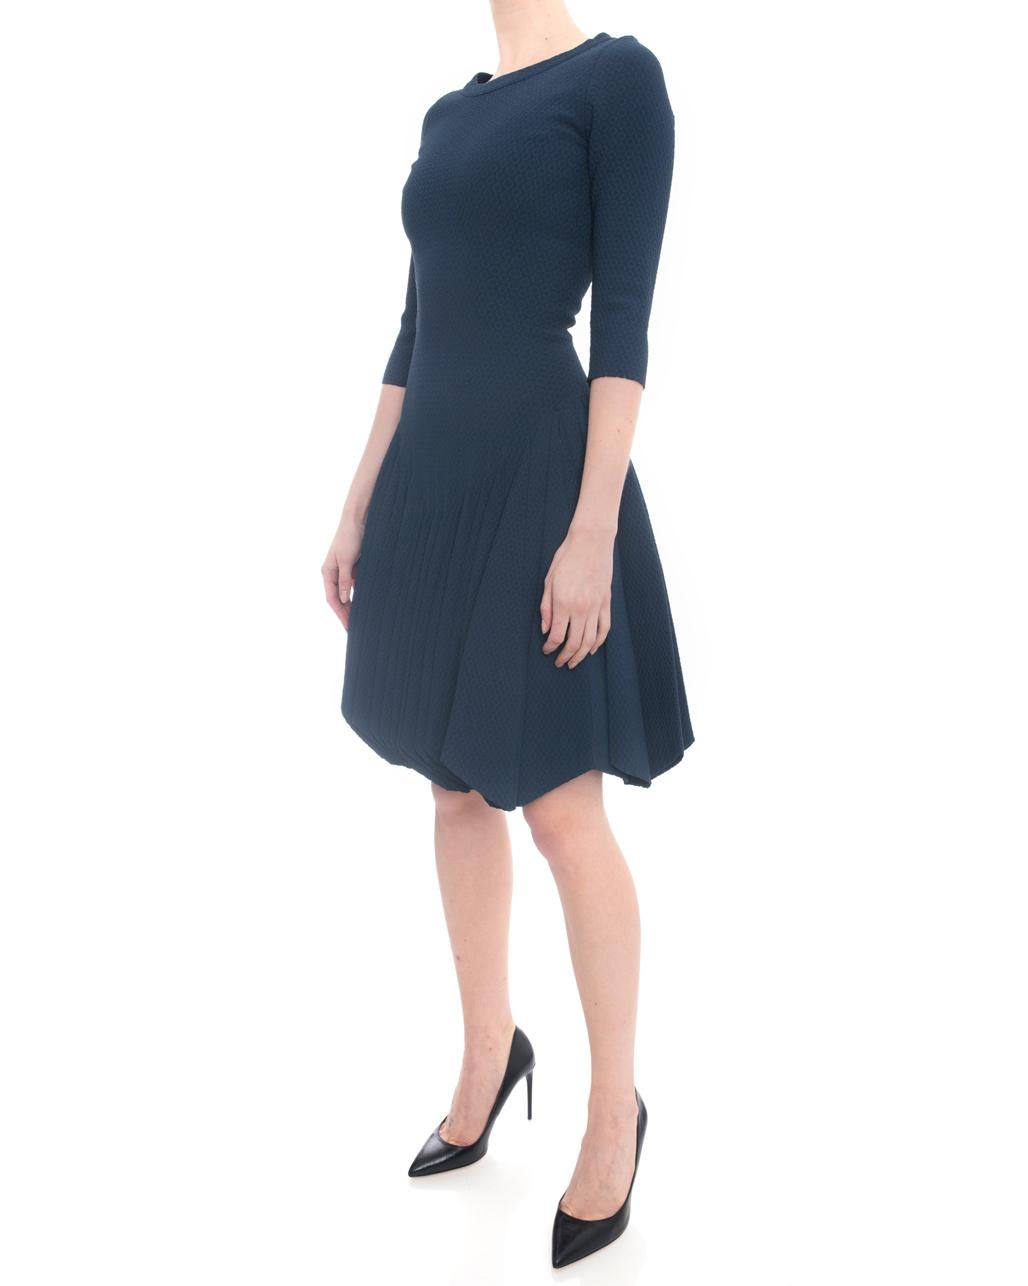 Alaia Prussian Blue Stretch Knit Fit and Flare Dress - 38 1